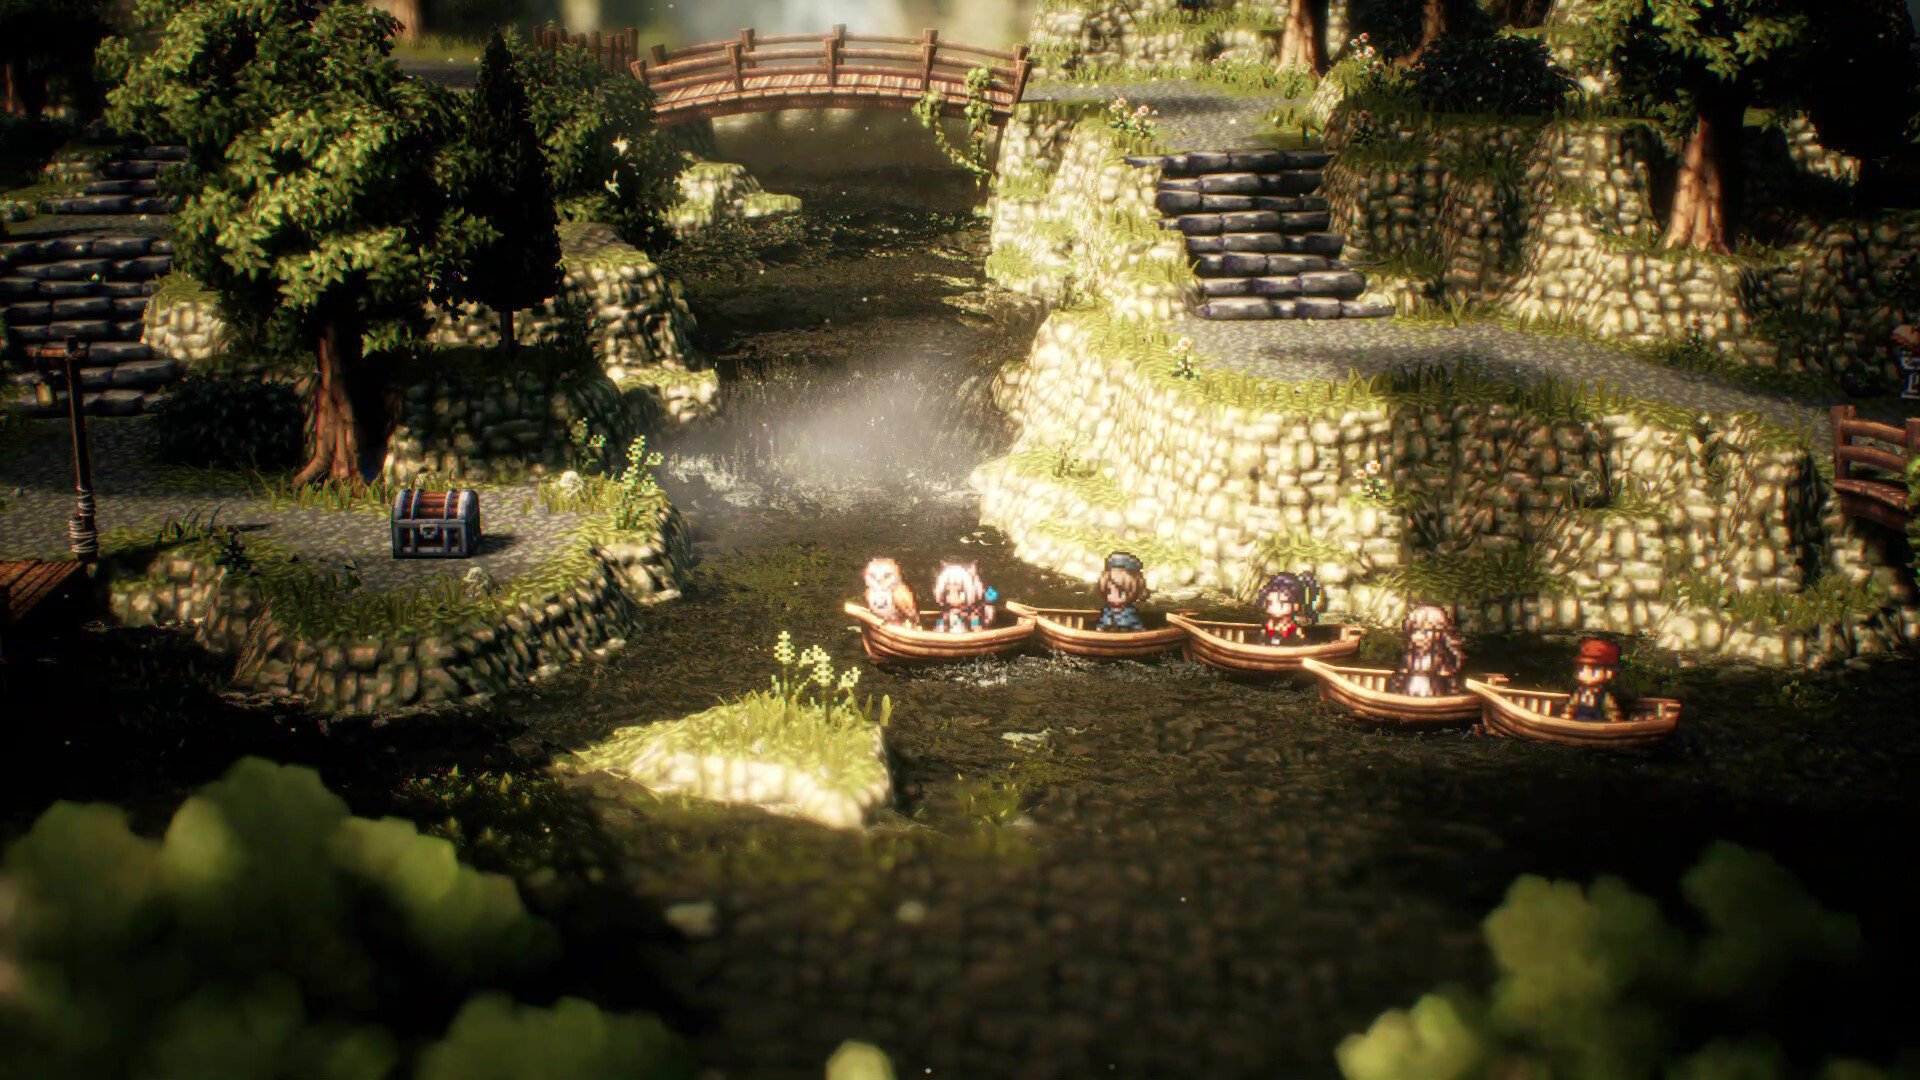 Octopath Traveler II Review (PS5)